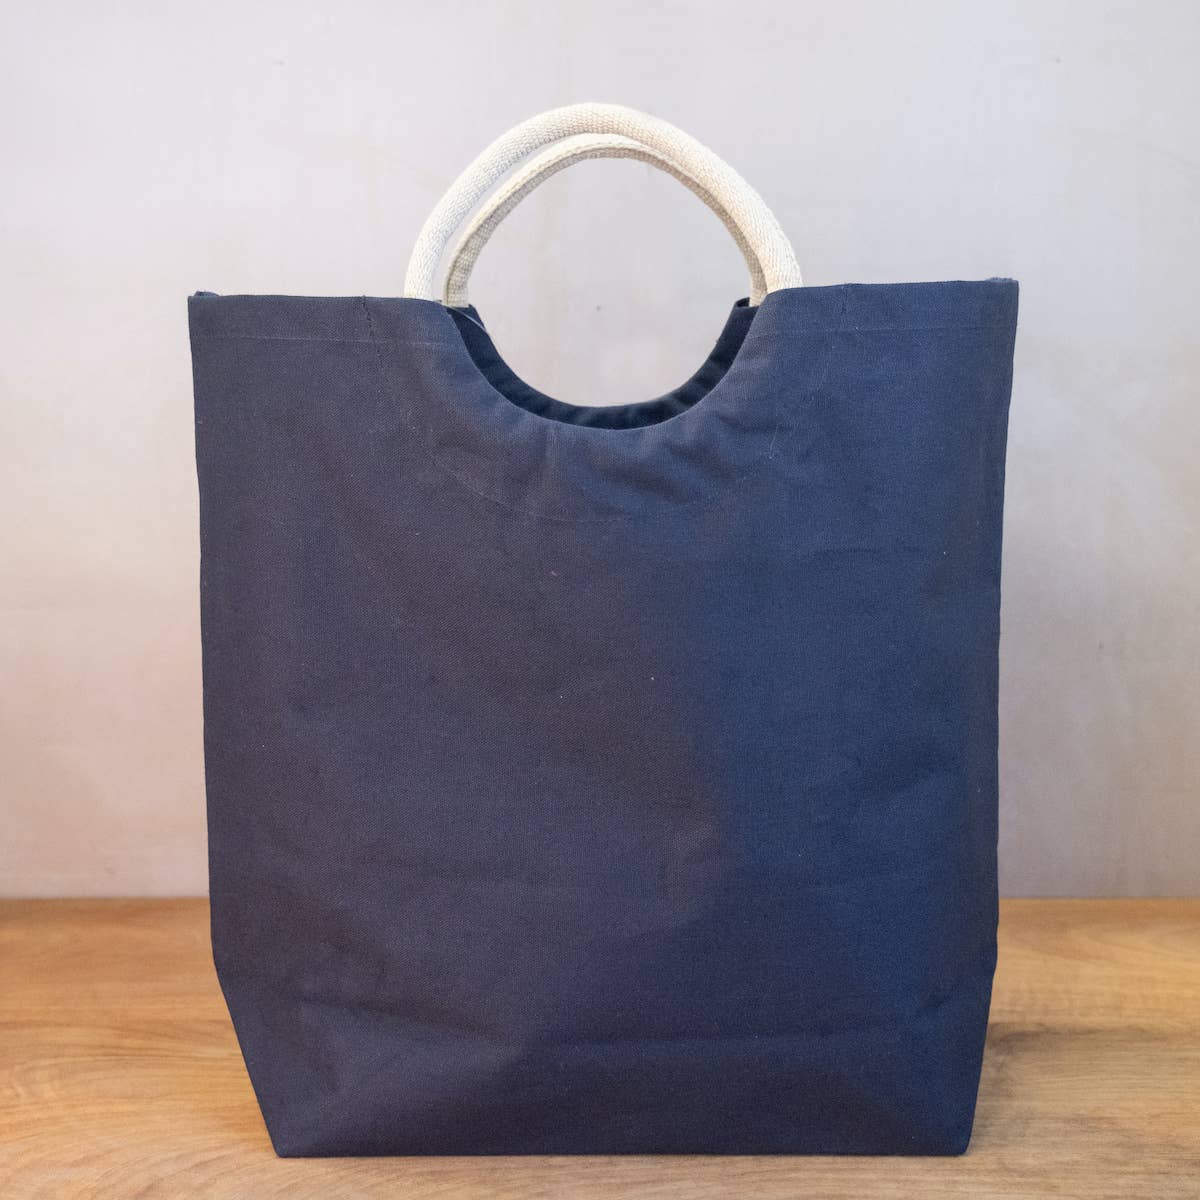 Shore Tote Navy by The Royal Standard